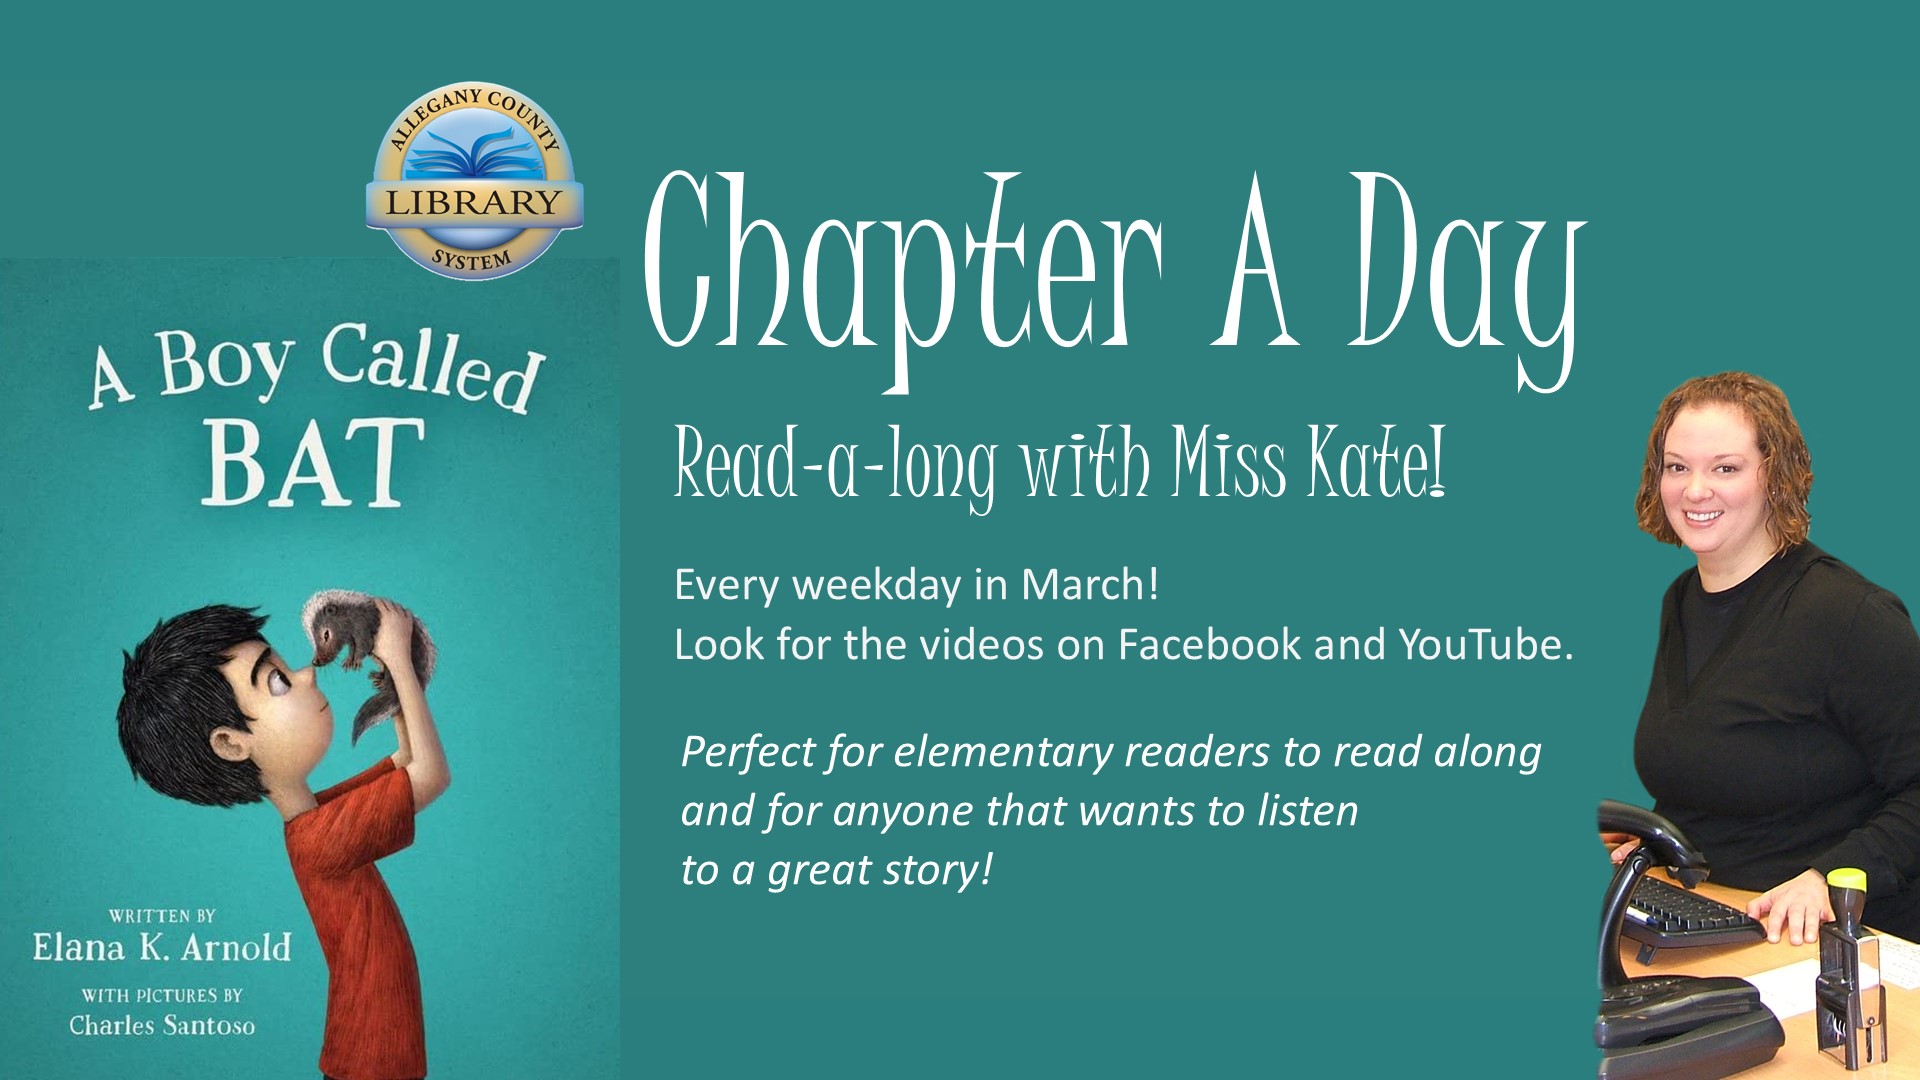 A Boy Called Bat book cover, event description and a photo of Miss Kate